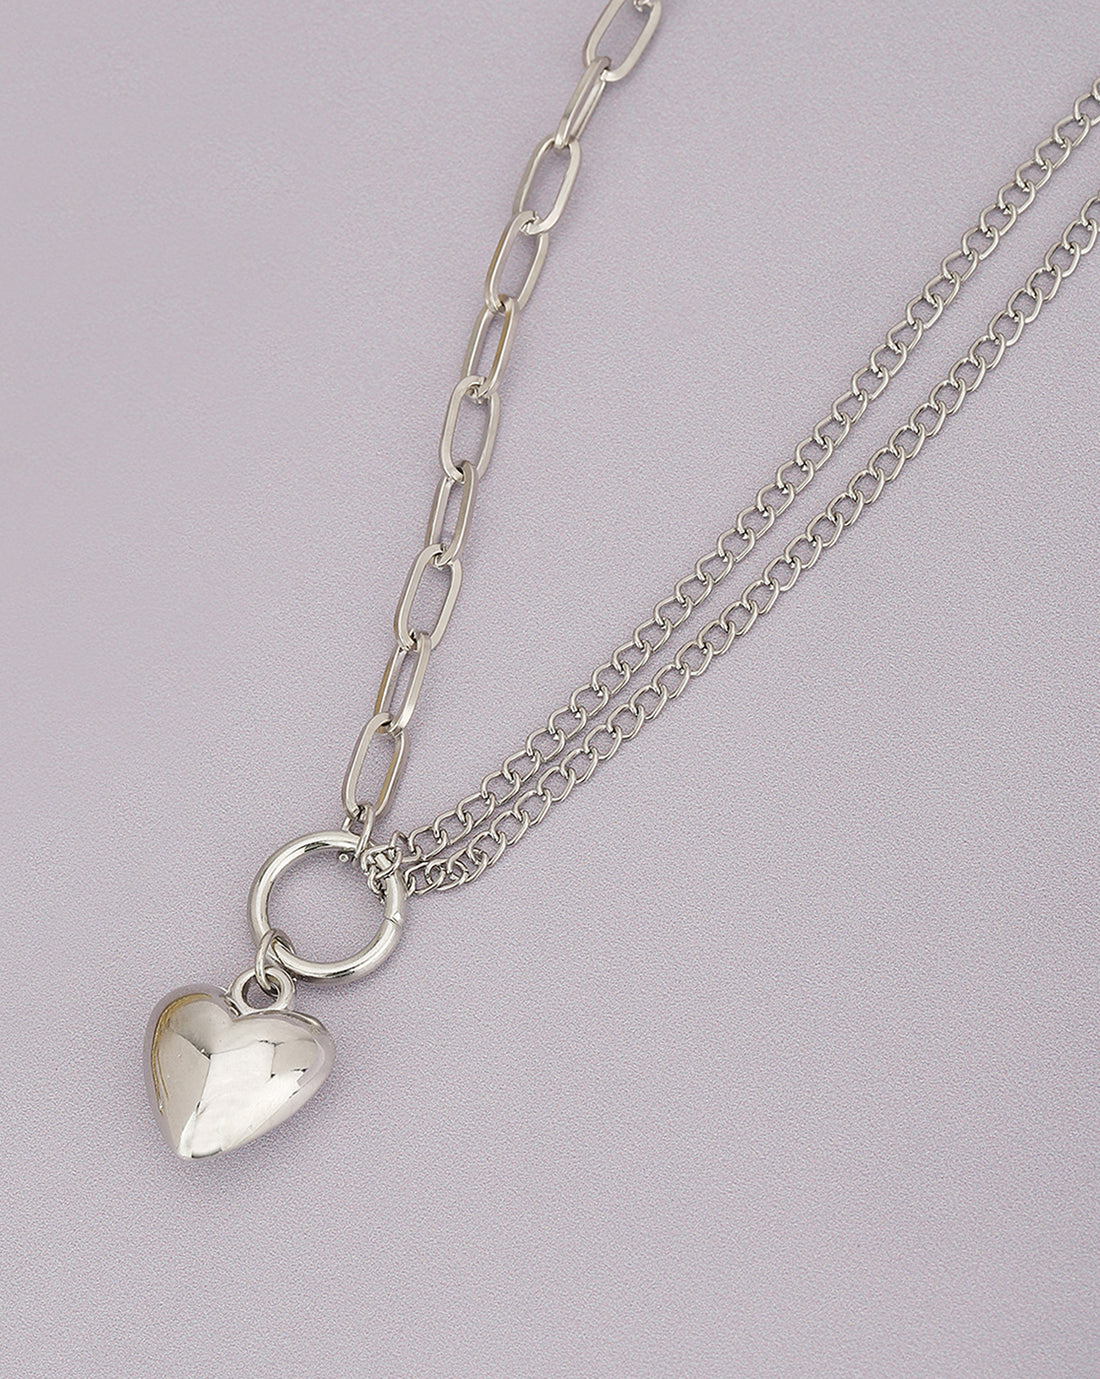 Double Chain With Dangling Heart And Rhodium Plated Necklace For Women